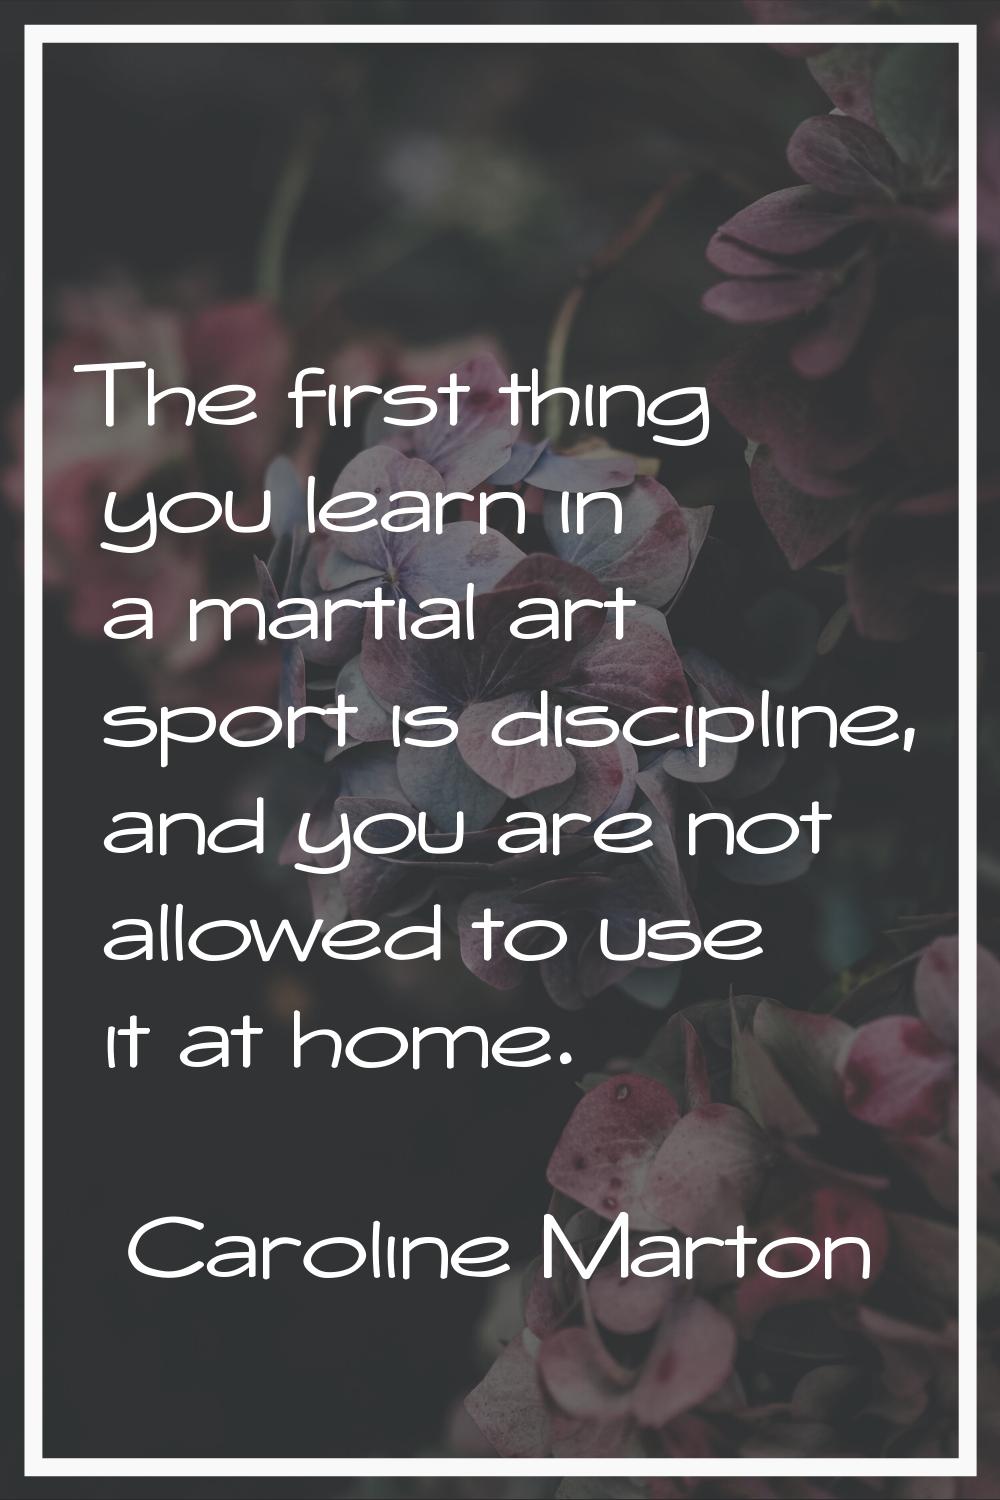 The first thing you learn in a martial art sport is discipline, and you are not allowed to use it a